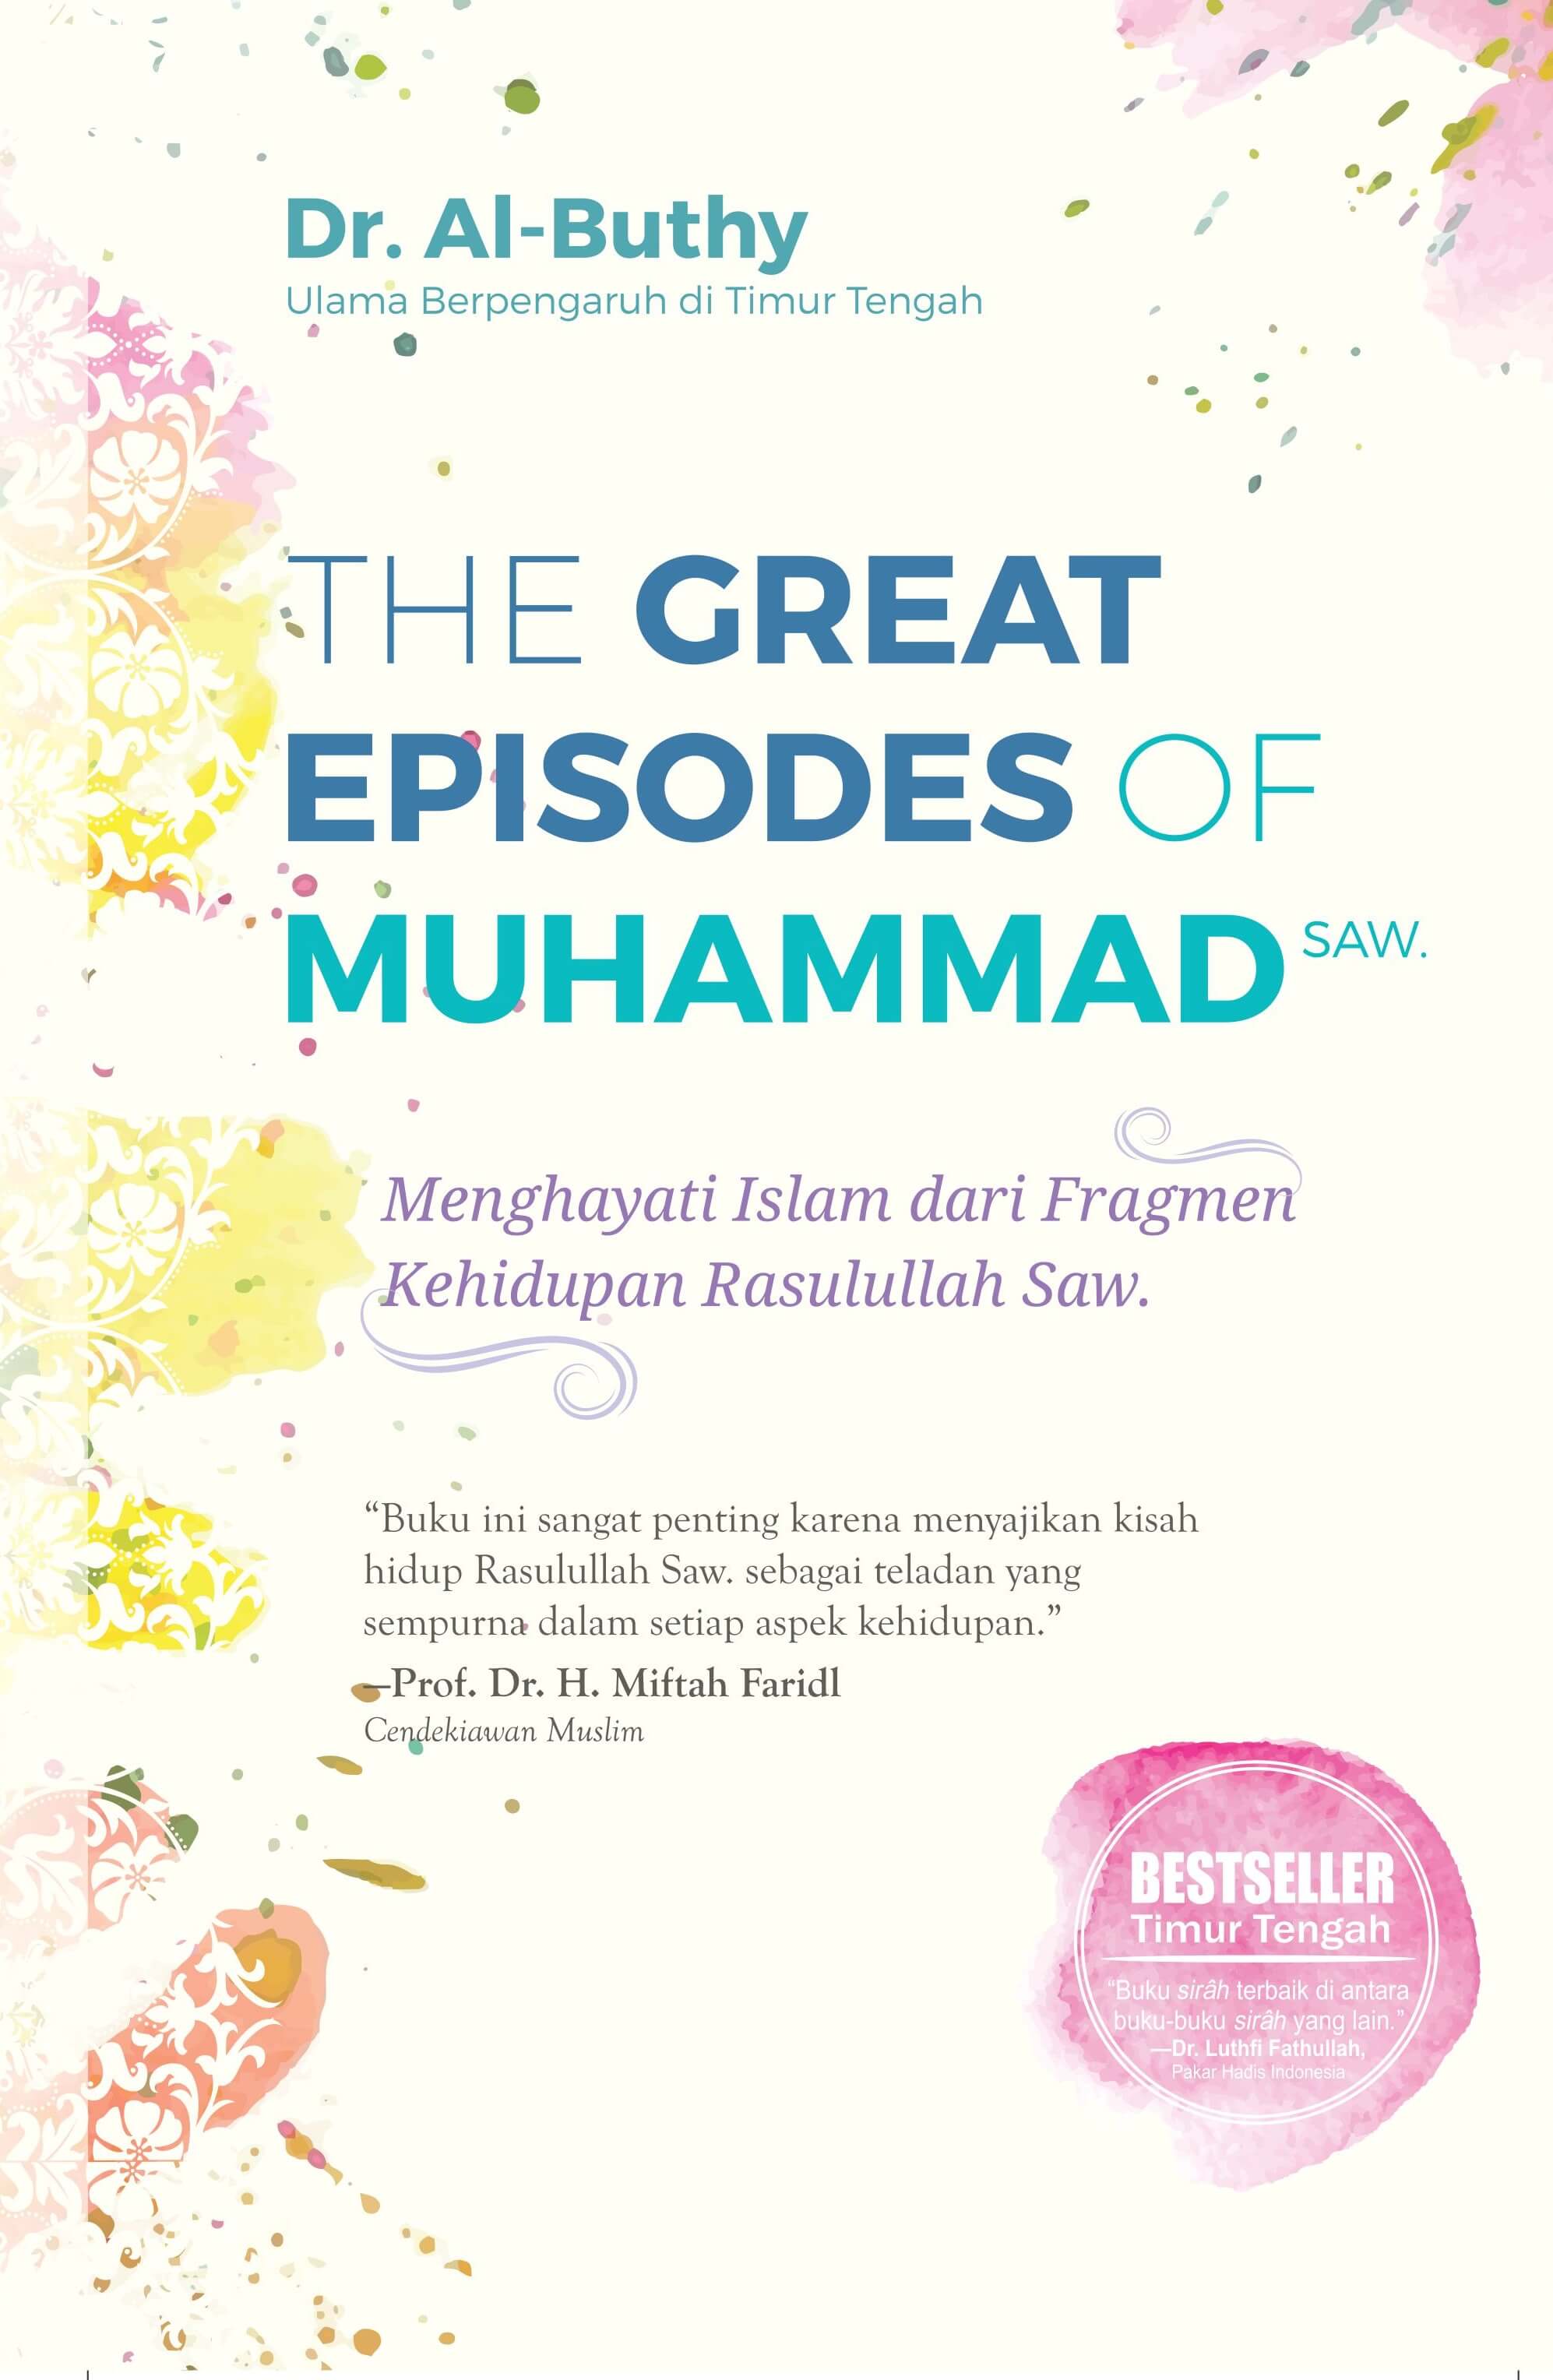 THE GREAT EPISODES OF MUHAMMAD SAW-NEW